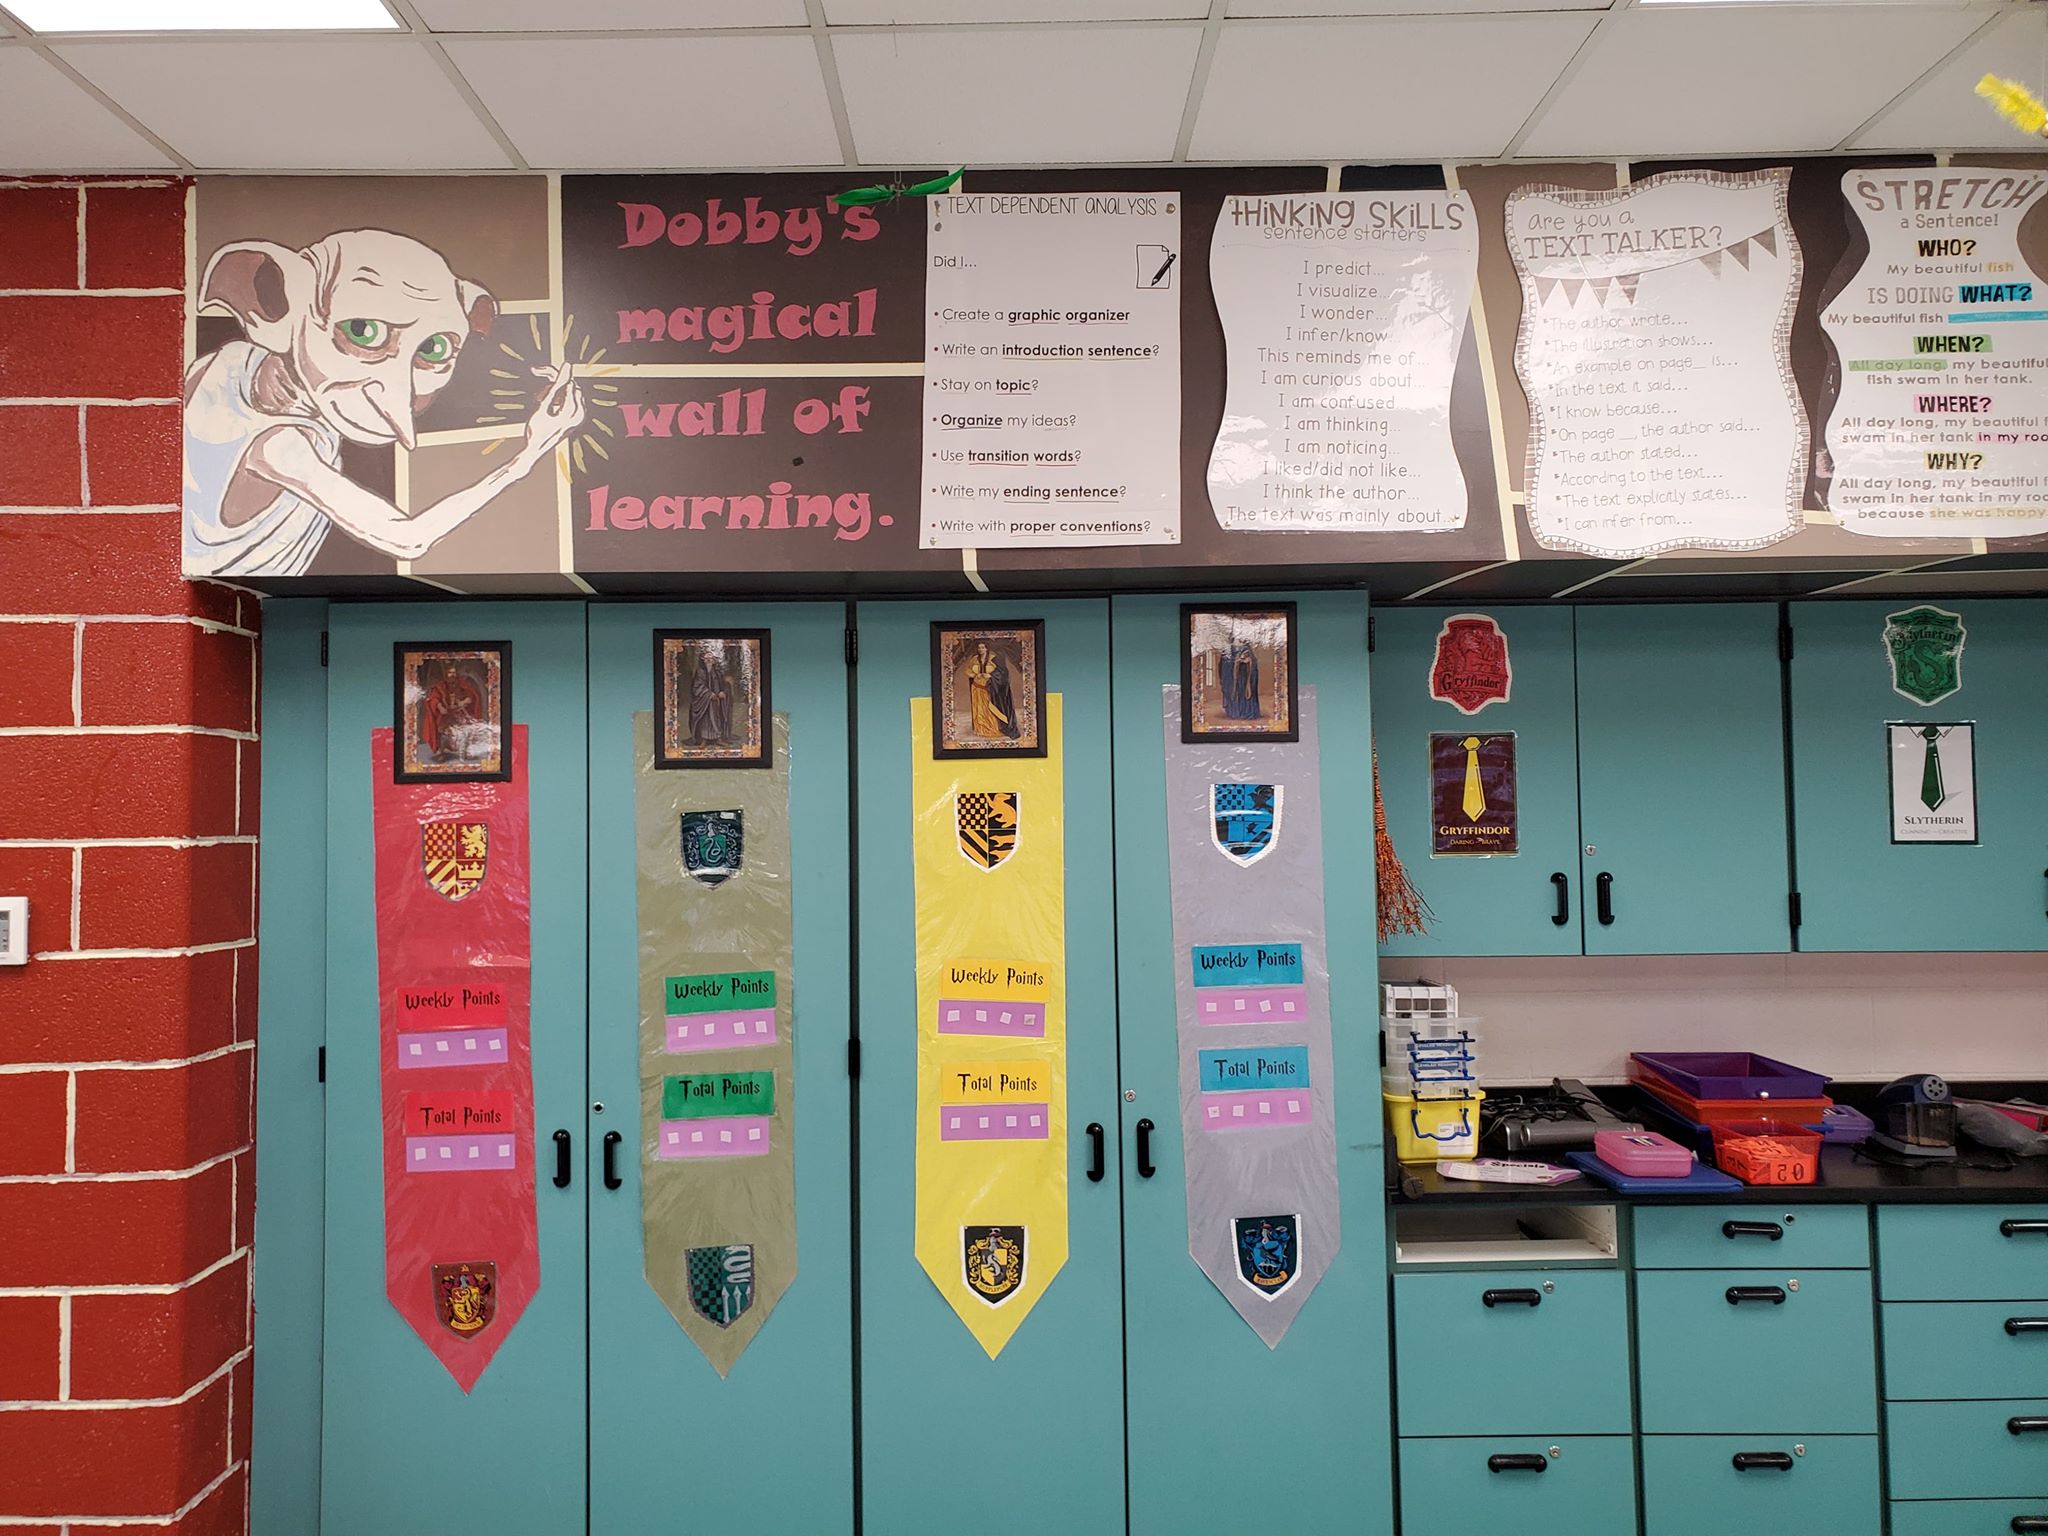 The four house banners inside the classroom.